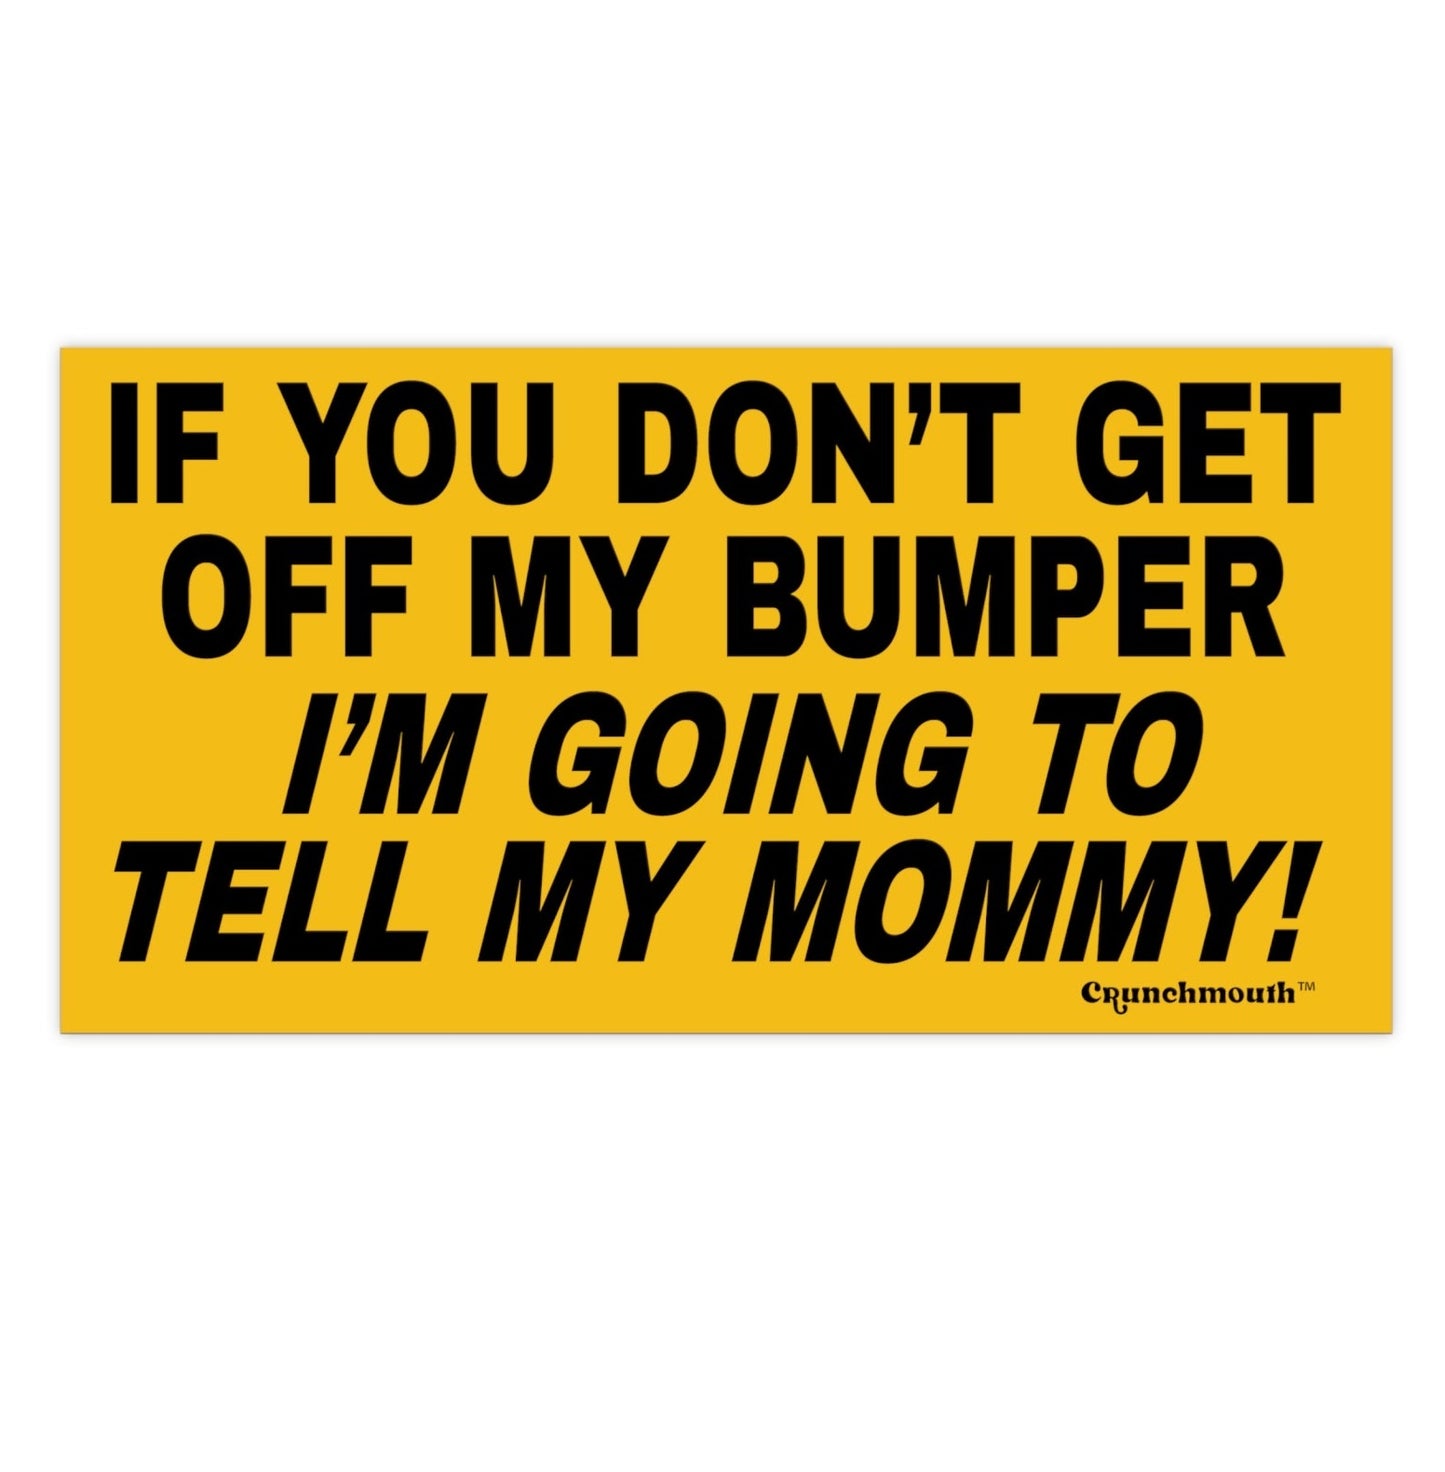 if you don't get off my bumper i'm going to tell my mommy! bumper sticker